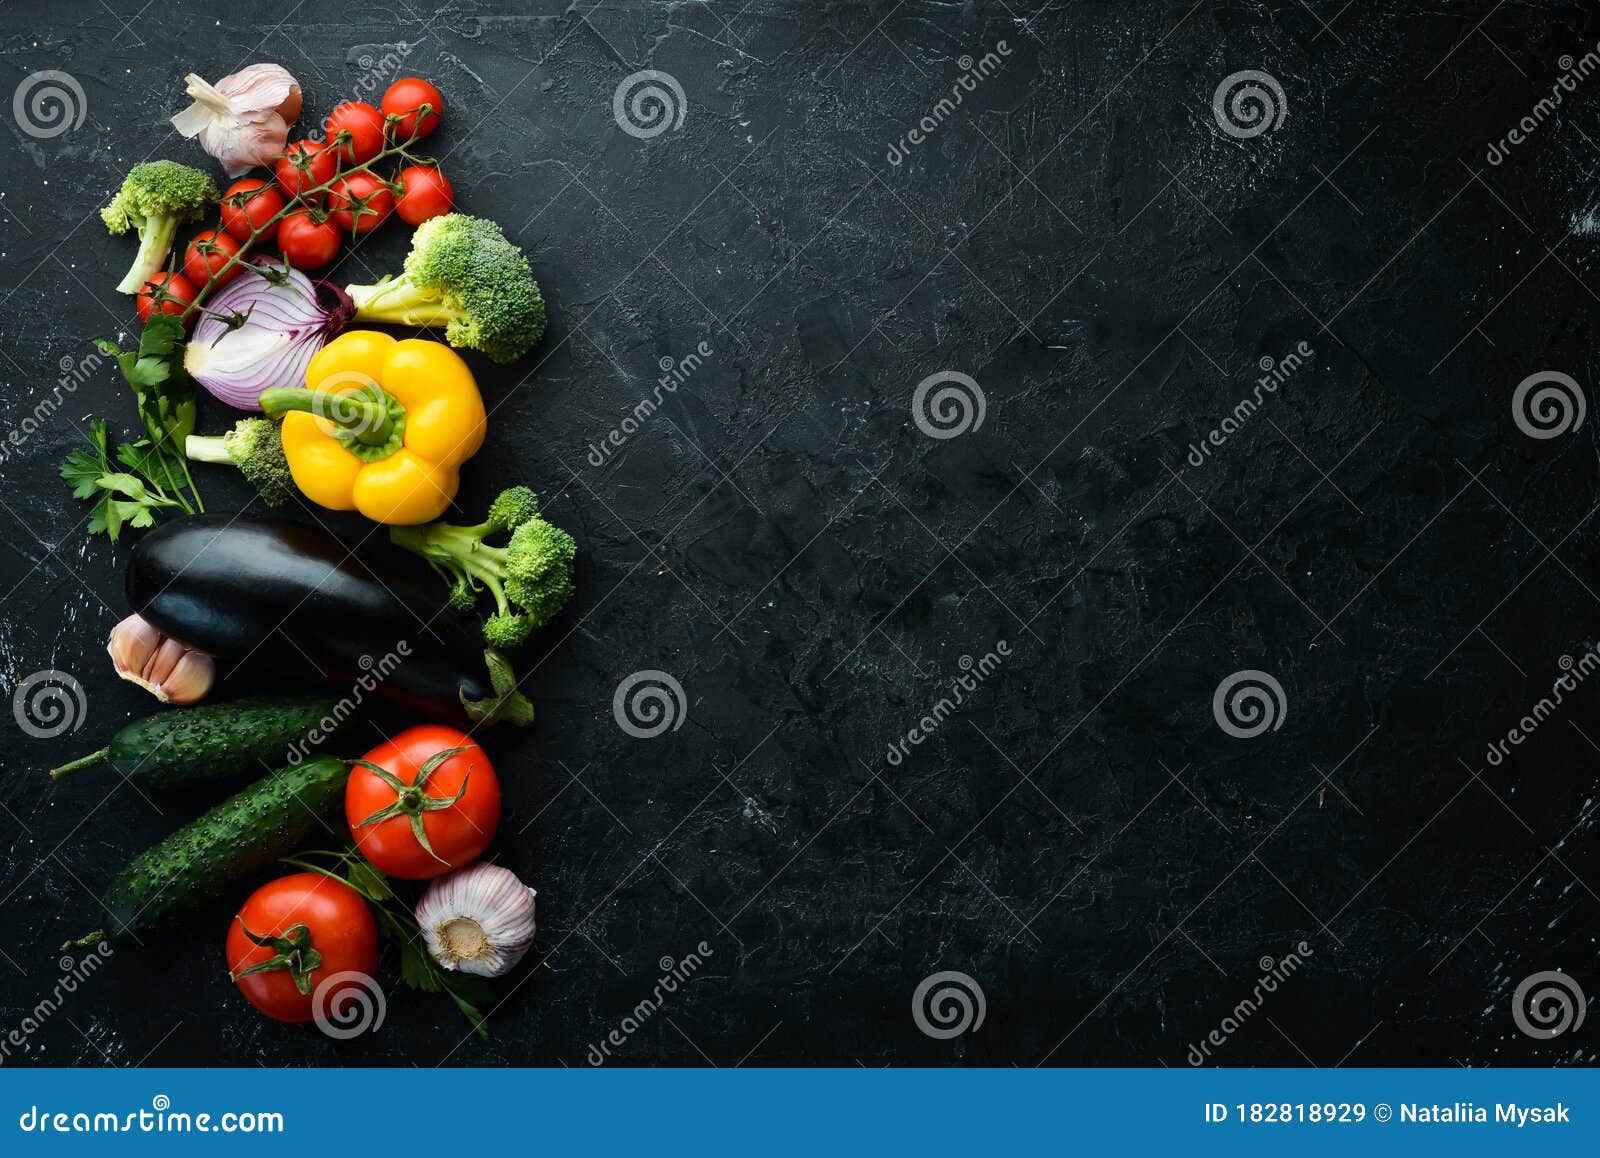 ripe vegetables. fresh vegetables on black stone background. tropical fruits. top view.